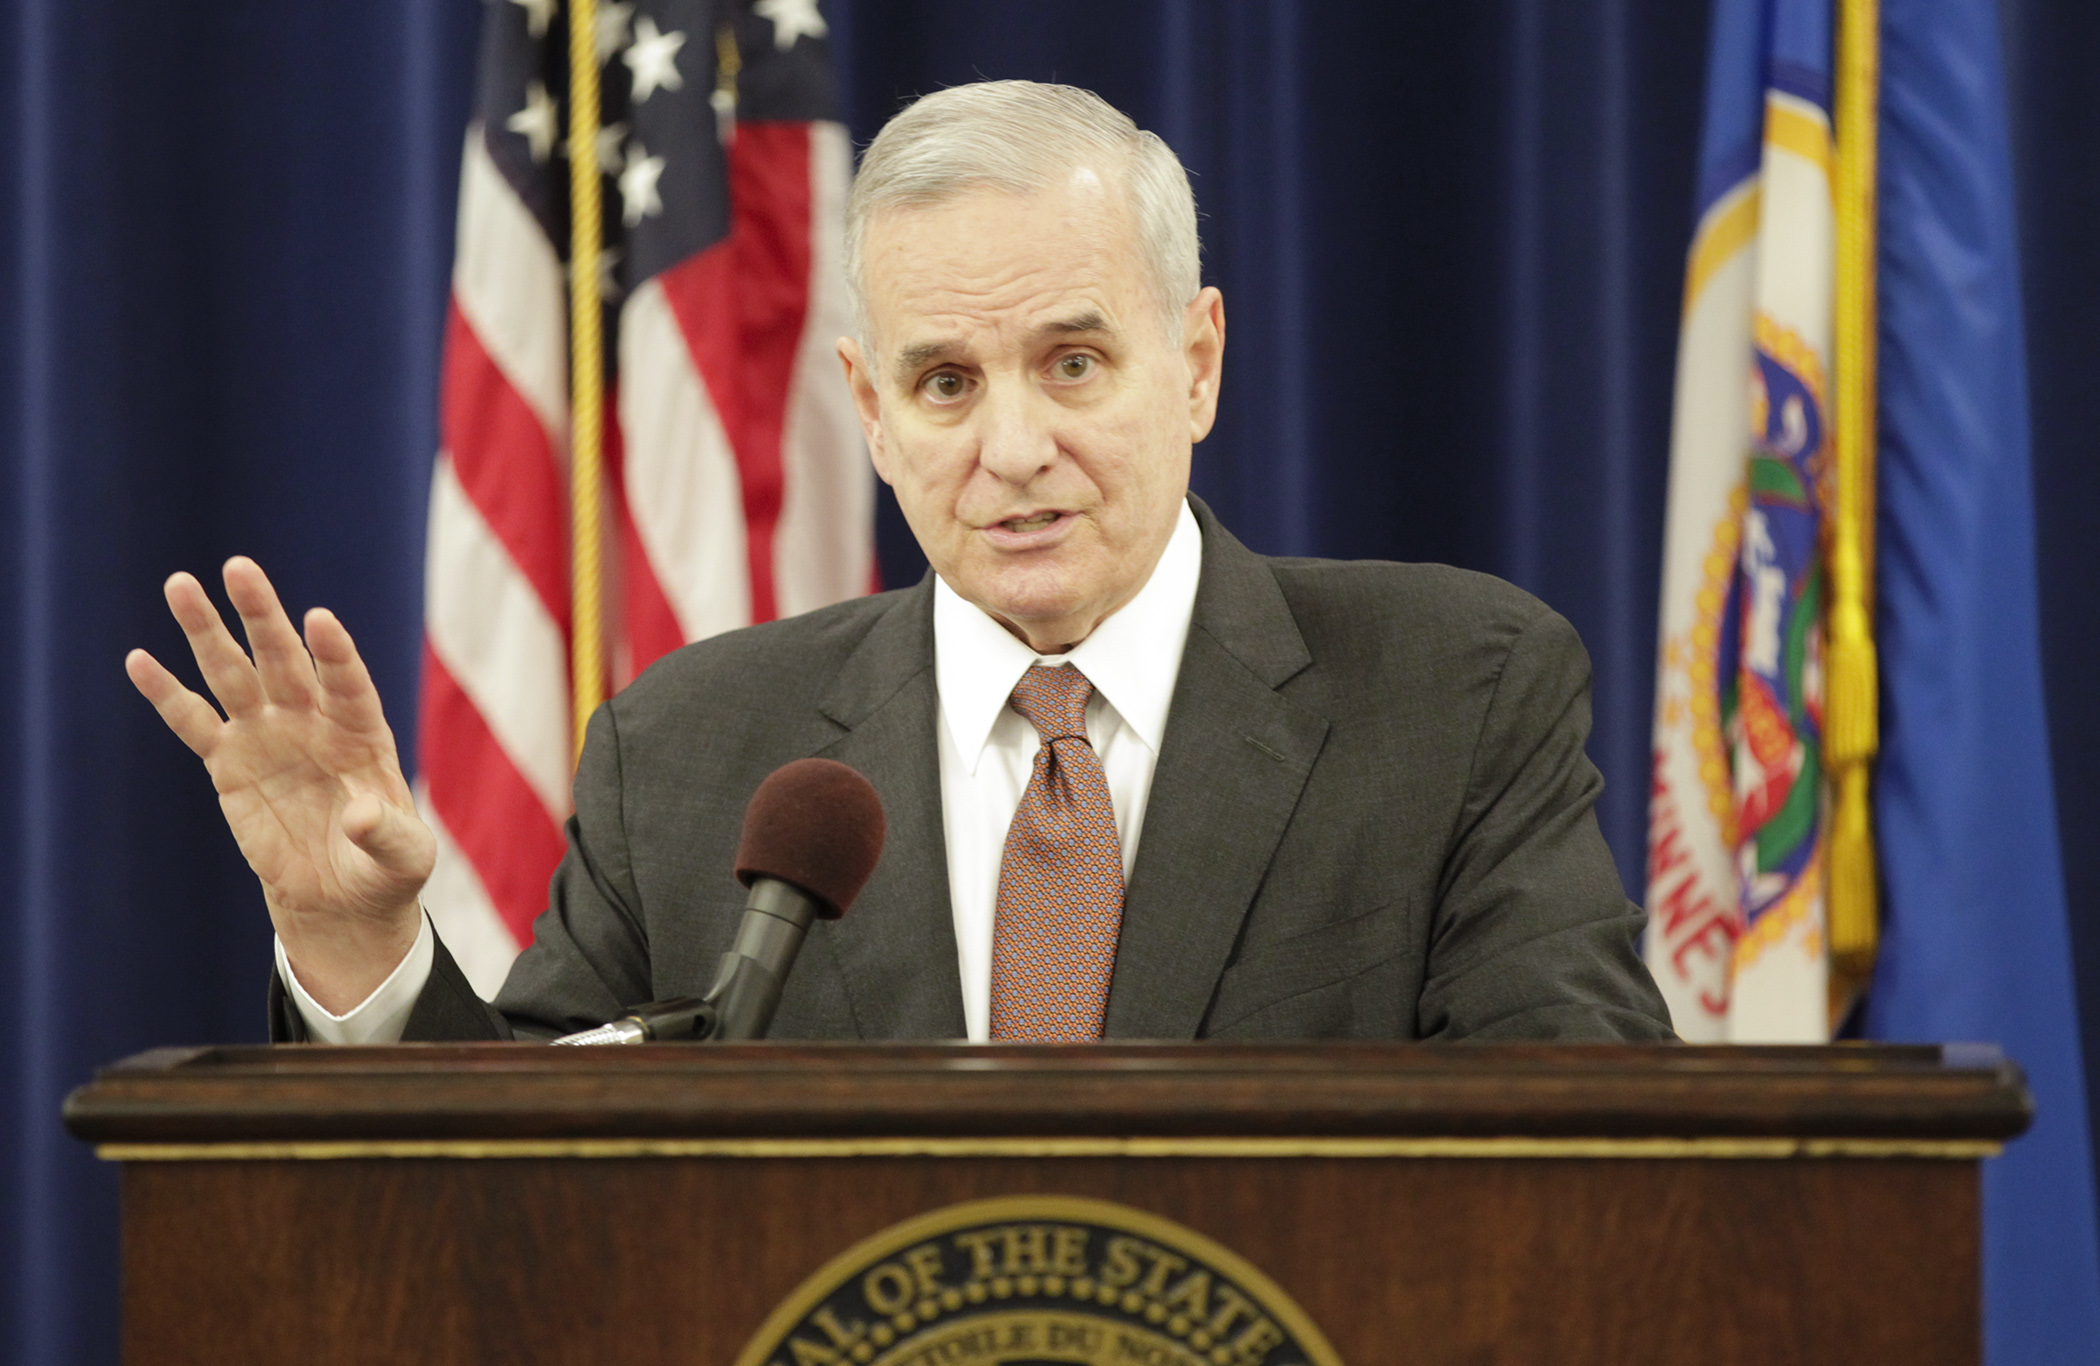 Gov. Mark Dayton outlines his 2016 supplemental budget proposal at a March 15 news conference. The proposal includes additional spending on broadband, pre-k and clean water. Photo by Paul Battaglia